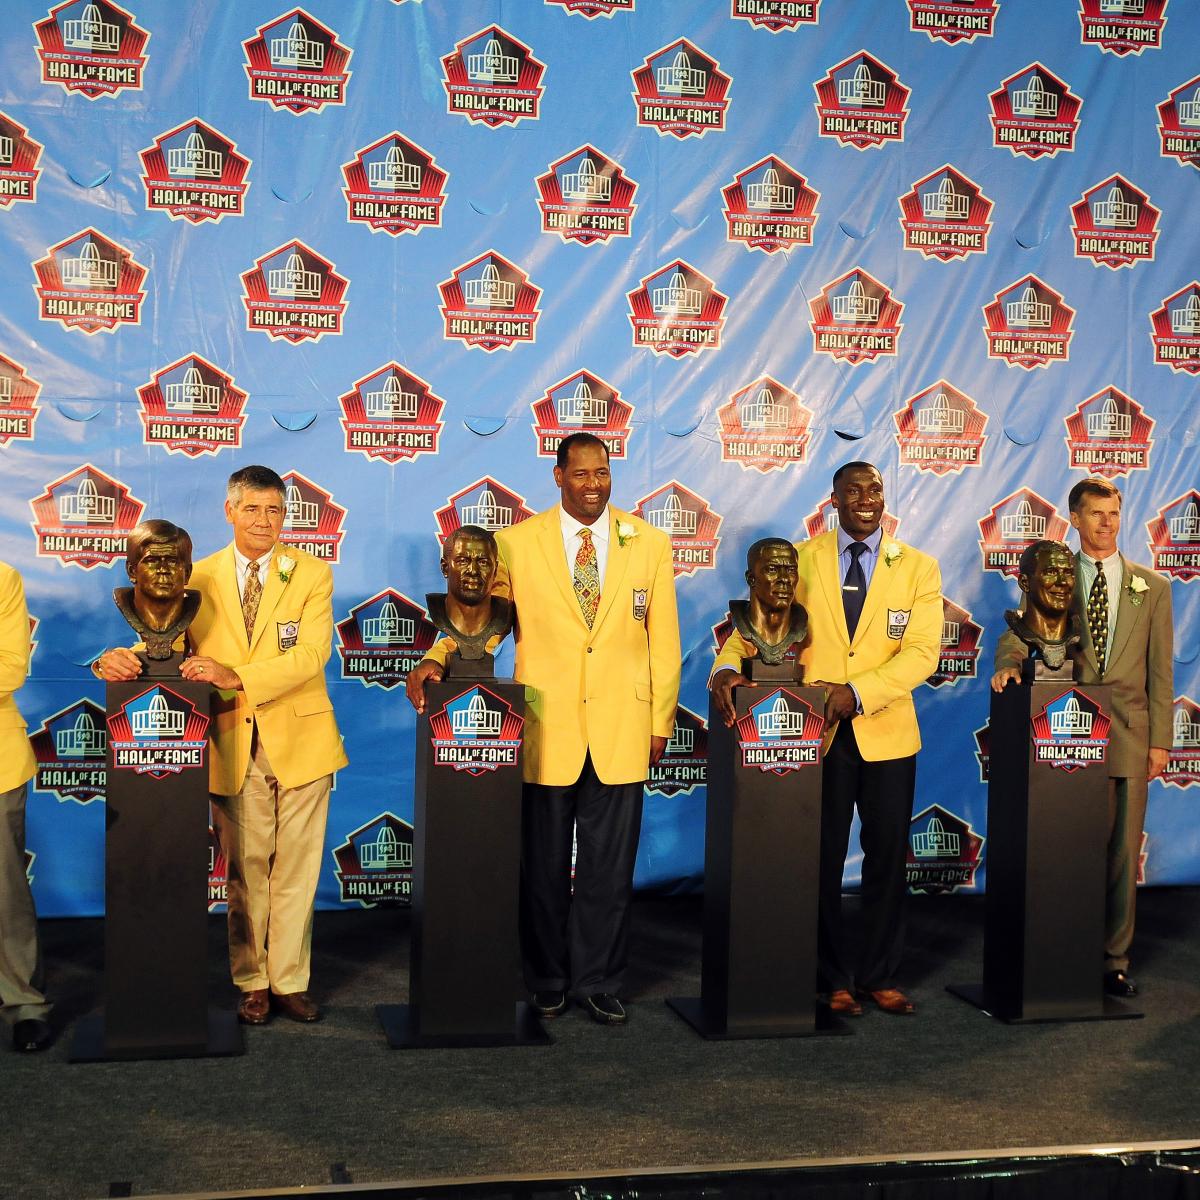 2012 Pro Football Hall of Fame: Complete List of Inductees to Canton | Bleacher Report1200 x 1200